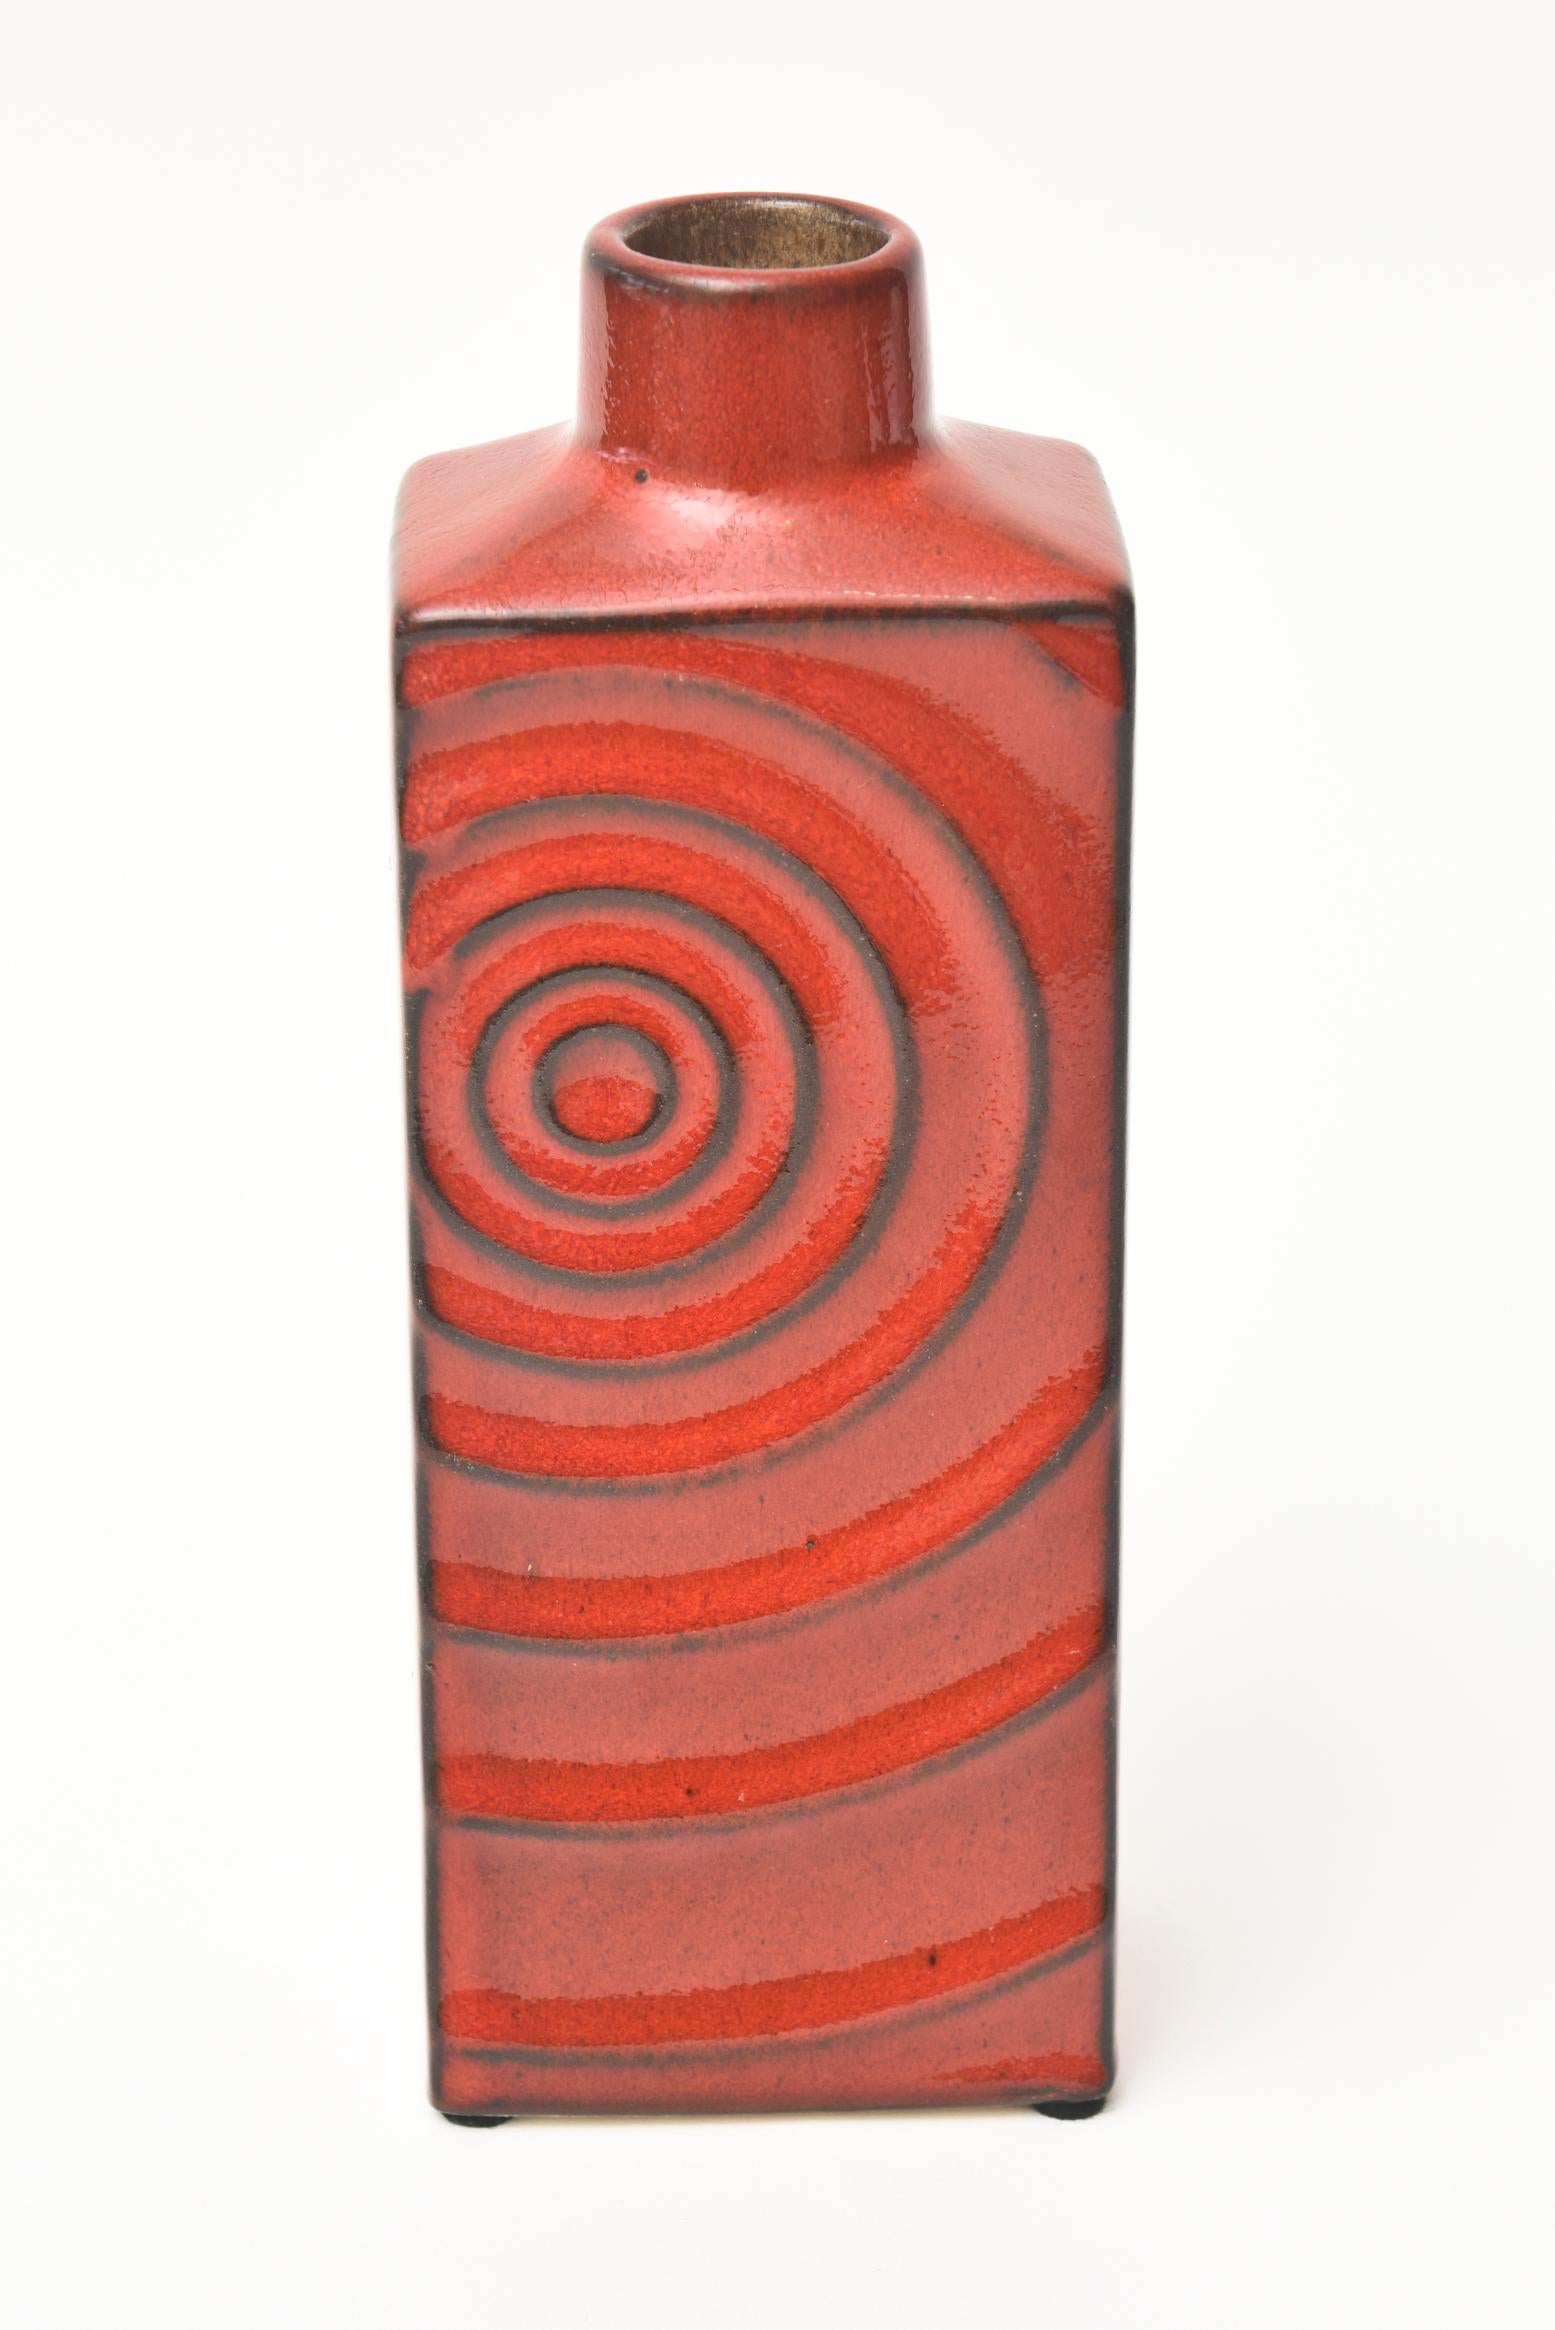 This brilliant red graphic glazed ceramic vase was designed by Cari Zalloni for Steuler Keramik ceramics in the 1970s. It is from West Germany. He was renowned at that time to create Space Age and optical pieces for Bay Keramik. It can be now used